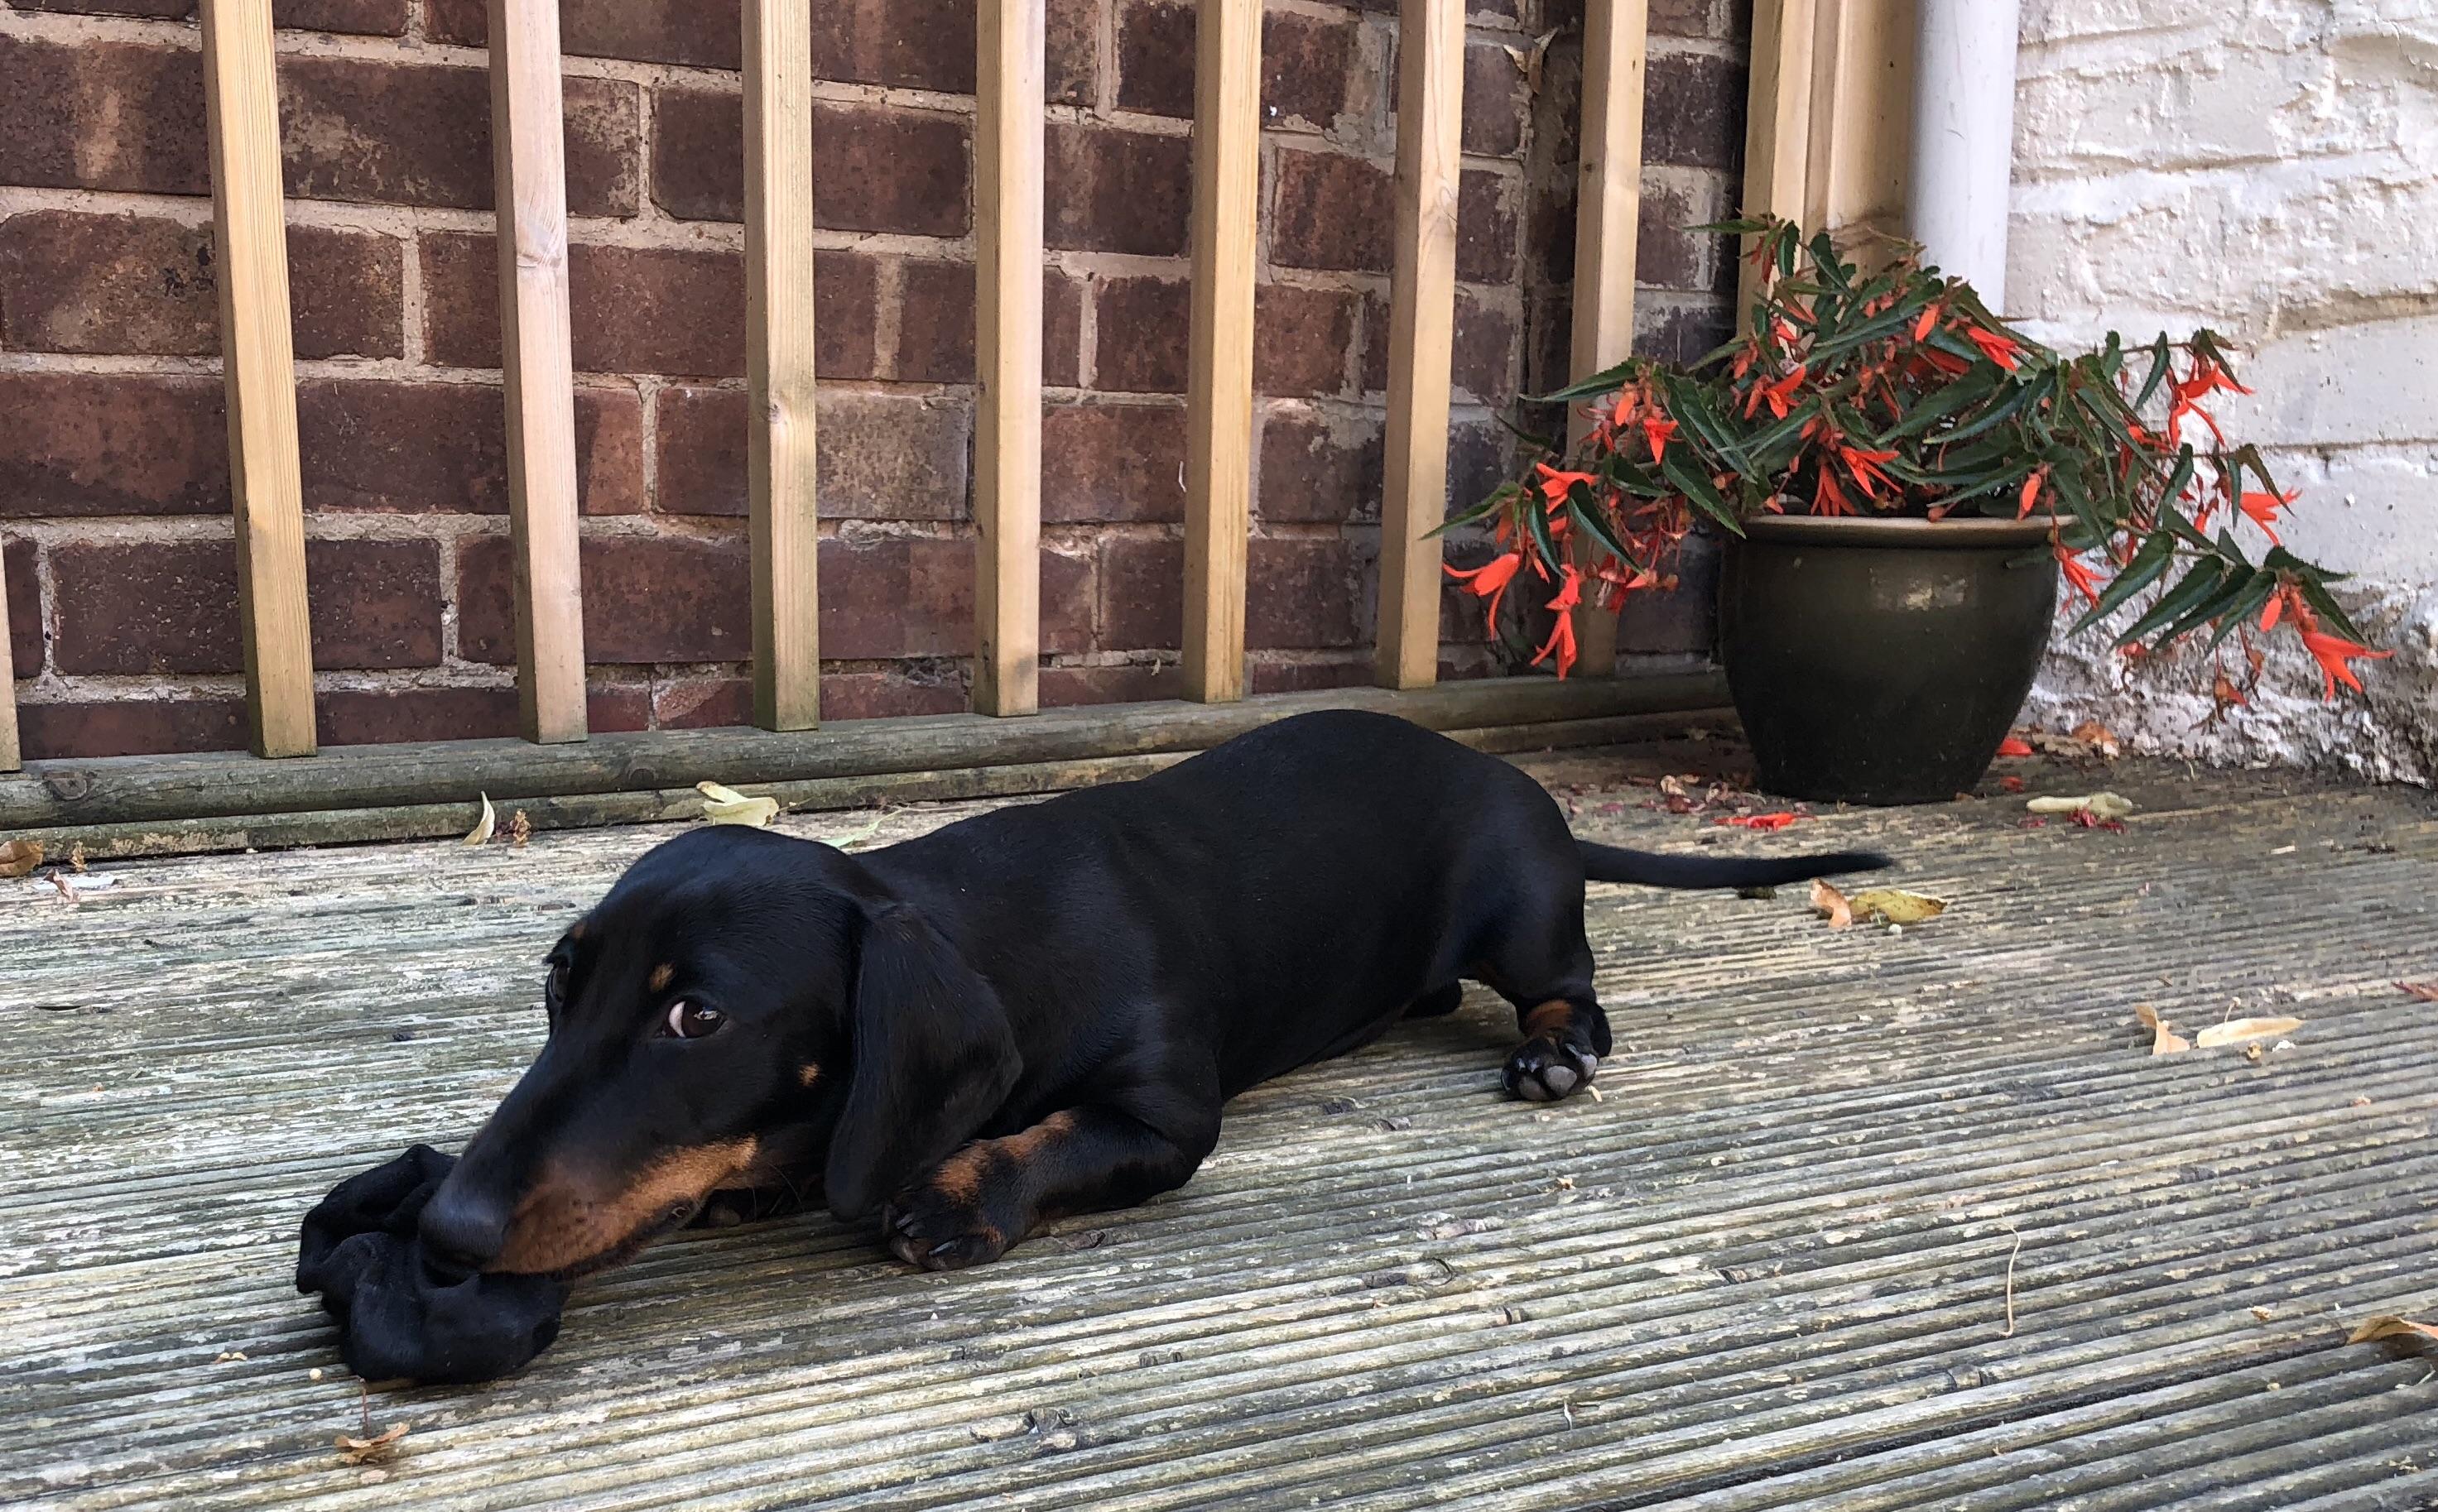 Dachshund lying down on the ground with black thing in its mouth